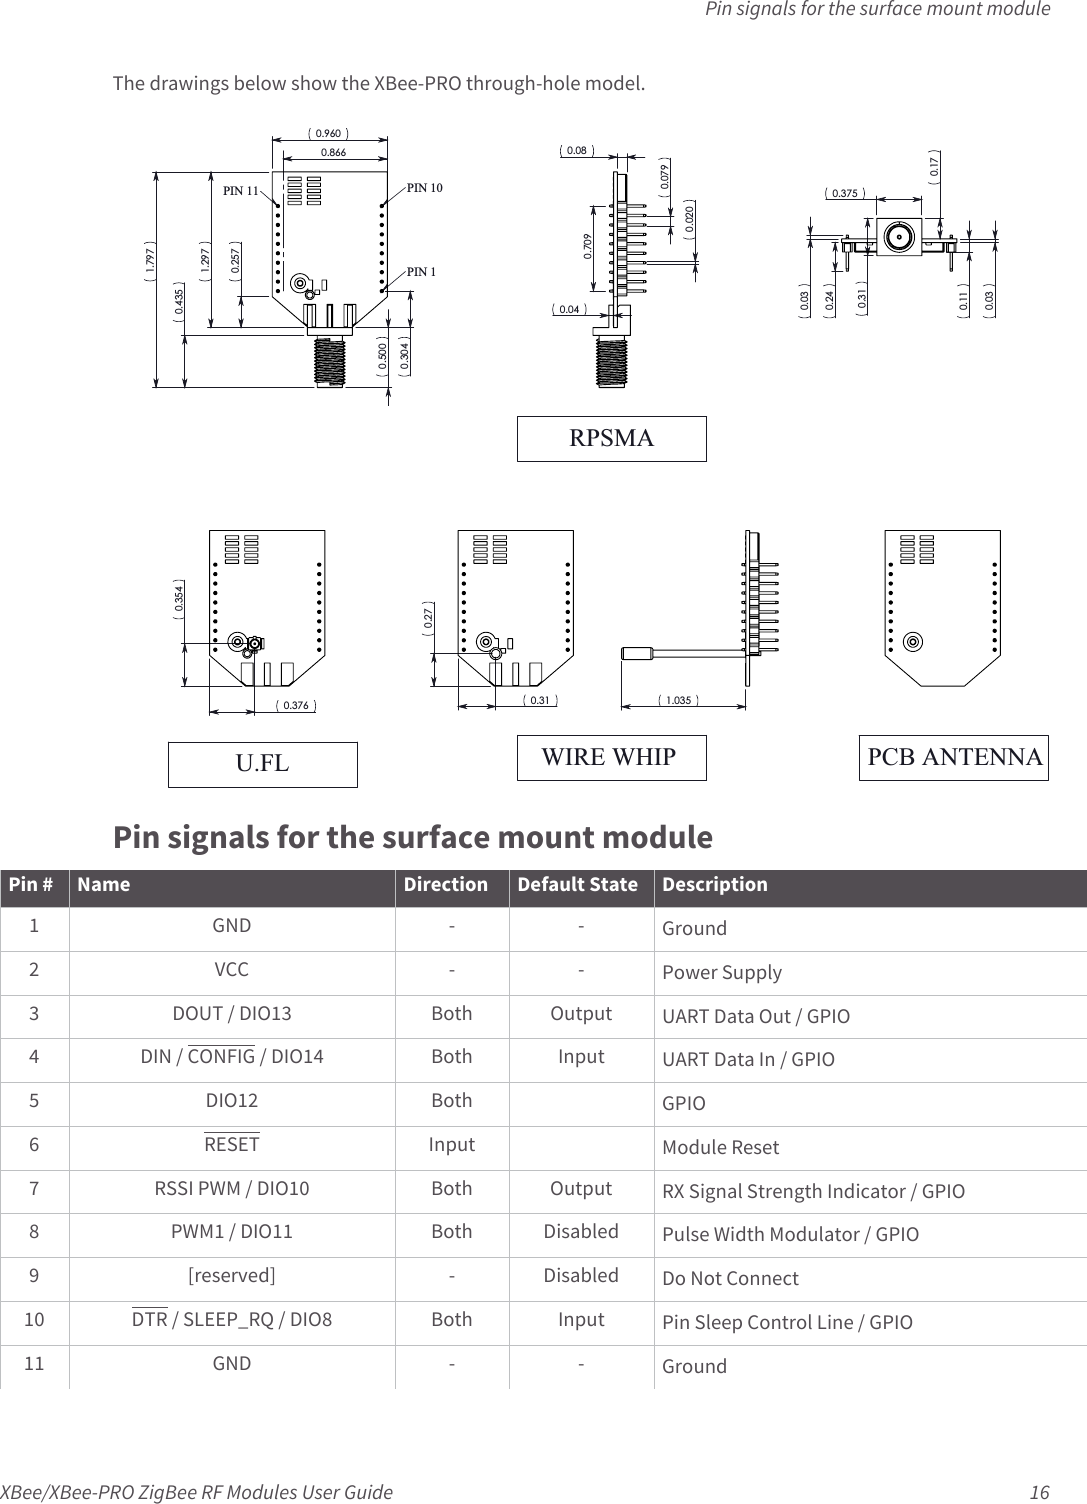 Pin signals for the surface mount moduleXBee/XBee-PRO ZigBee RF Modules User Guide 16The drawings below show the XBee-PRO through-hole model.Pin signals for the surface mount module3&amp;%$17(11$:,5(:+,38)/5360$3,1 3,13,1Pin # Name Direction Default State Description1GND --Ground2VCC --Power Supply3DOUT / DIO13 BothOutputUART Data Out / GPIO4 DIN / CONFIG / DIO14 Both Input UART Data In / GPIO5DIO12 Both GPIO6RESET Input Module Reset7 RSSI PWM / DIO10 Both Output RX Signal Strength Indicator / GPIO8PWM1 / DIO11 BothDisabledPulse Width Modulator / GPIO9 [reserved] - Disabled Do Not Connect10 DTR / SLEEP_RQ / DIO8 Both Input Pin Sleep Control Line / GPIO11 GND - - Ground